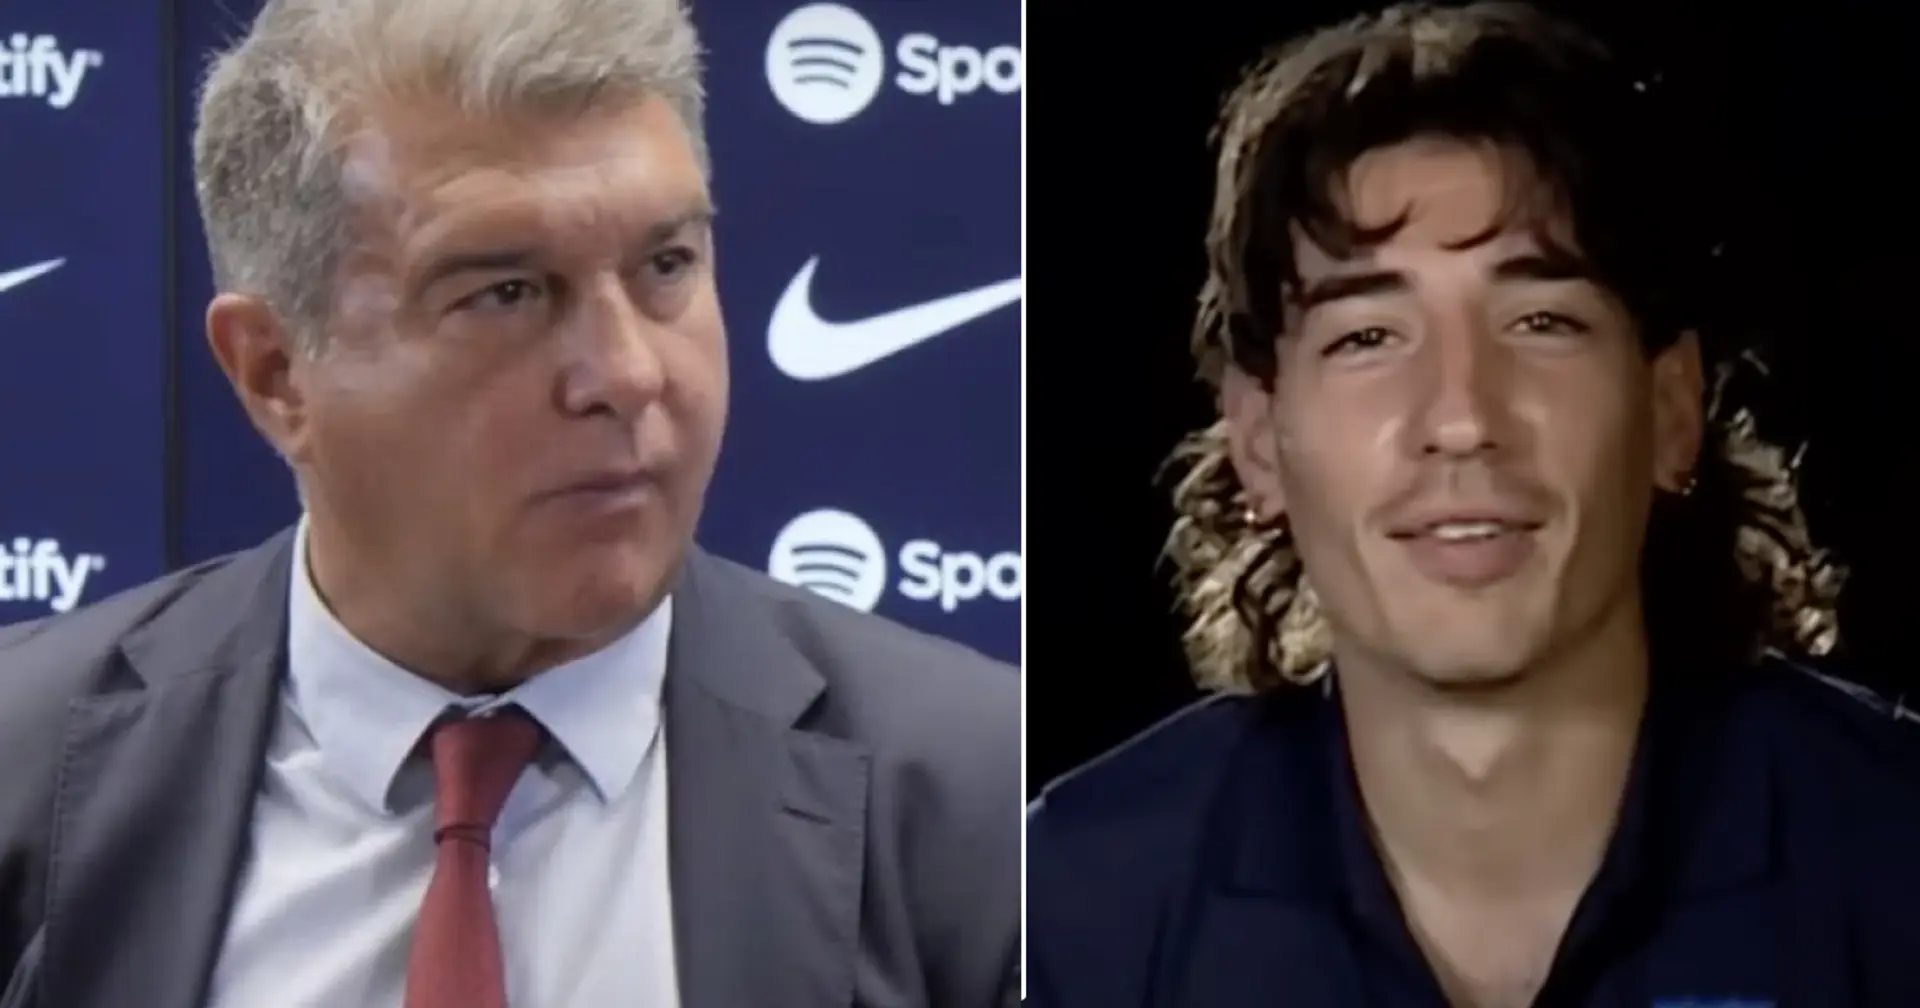 Sporting show interest in signing Bellerin, Barca's stance revealed